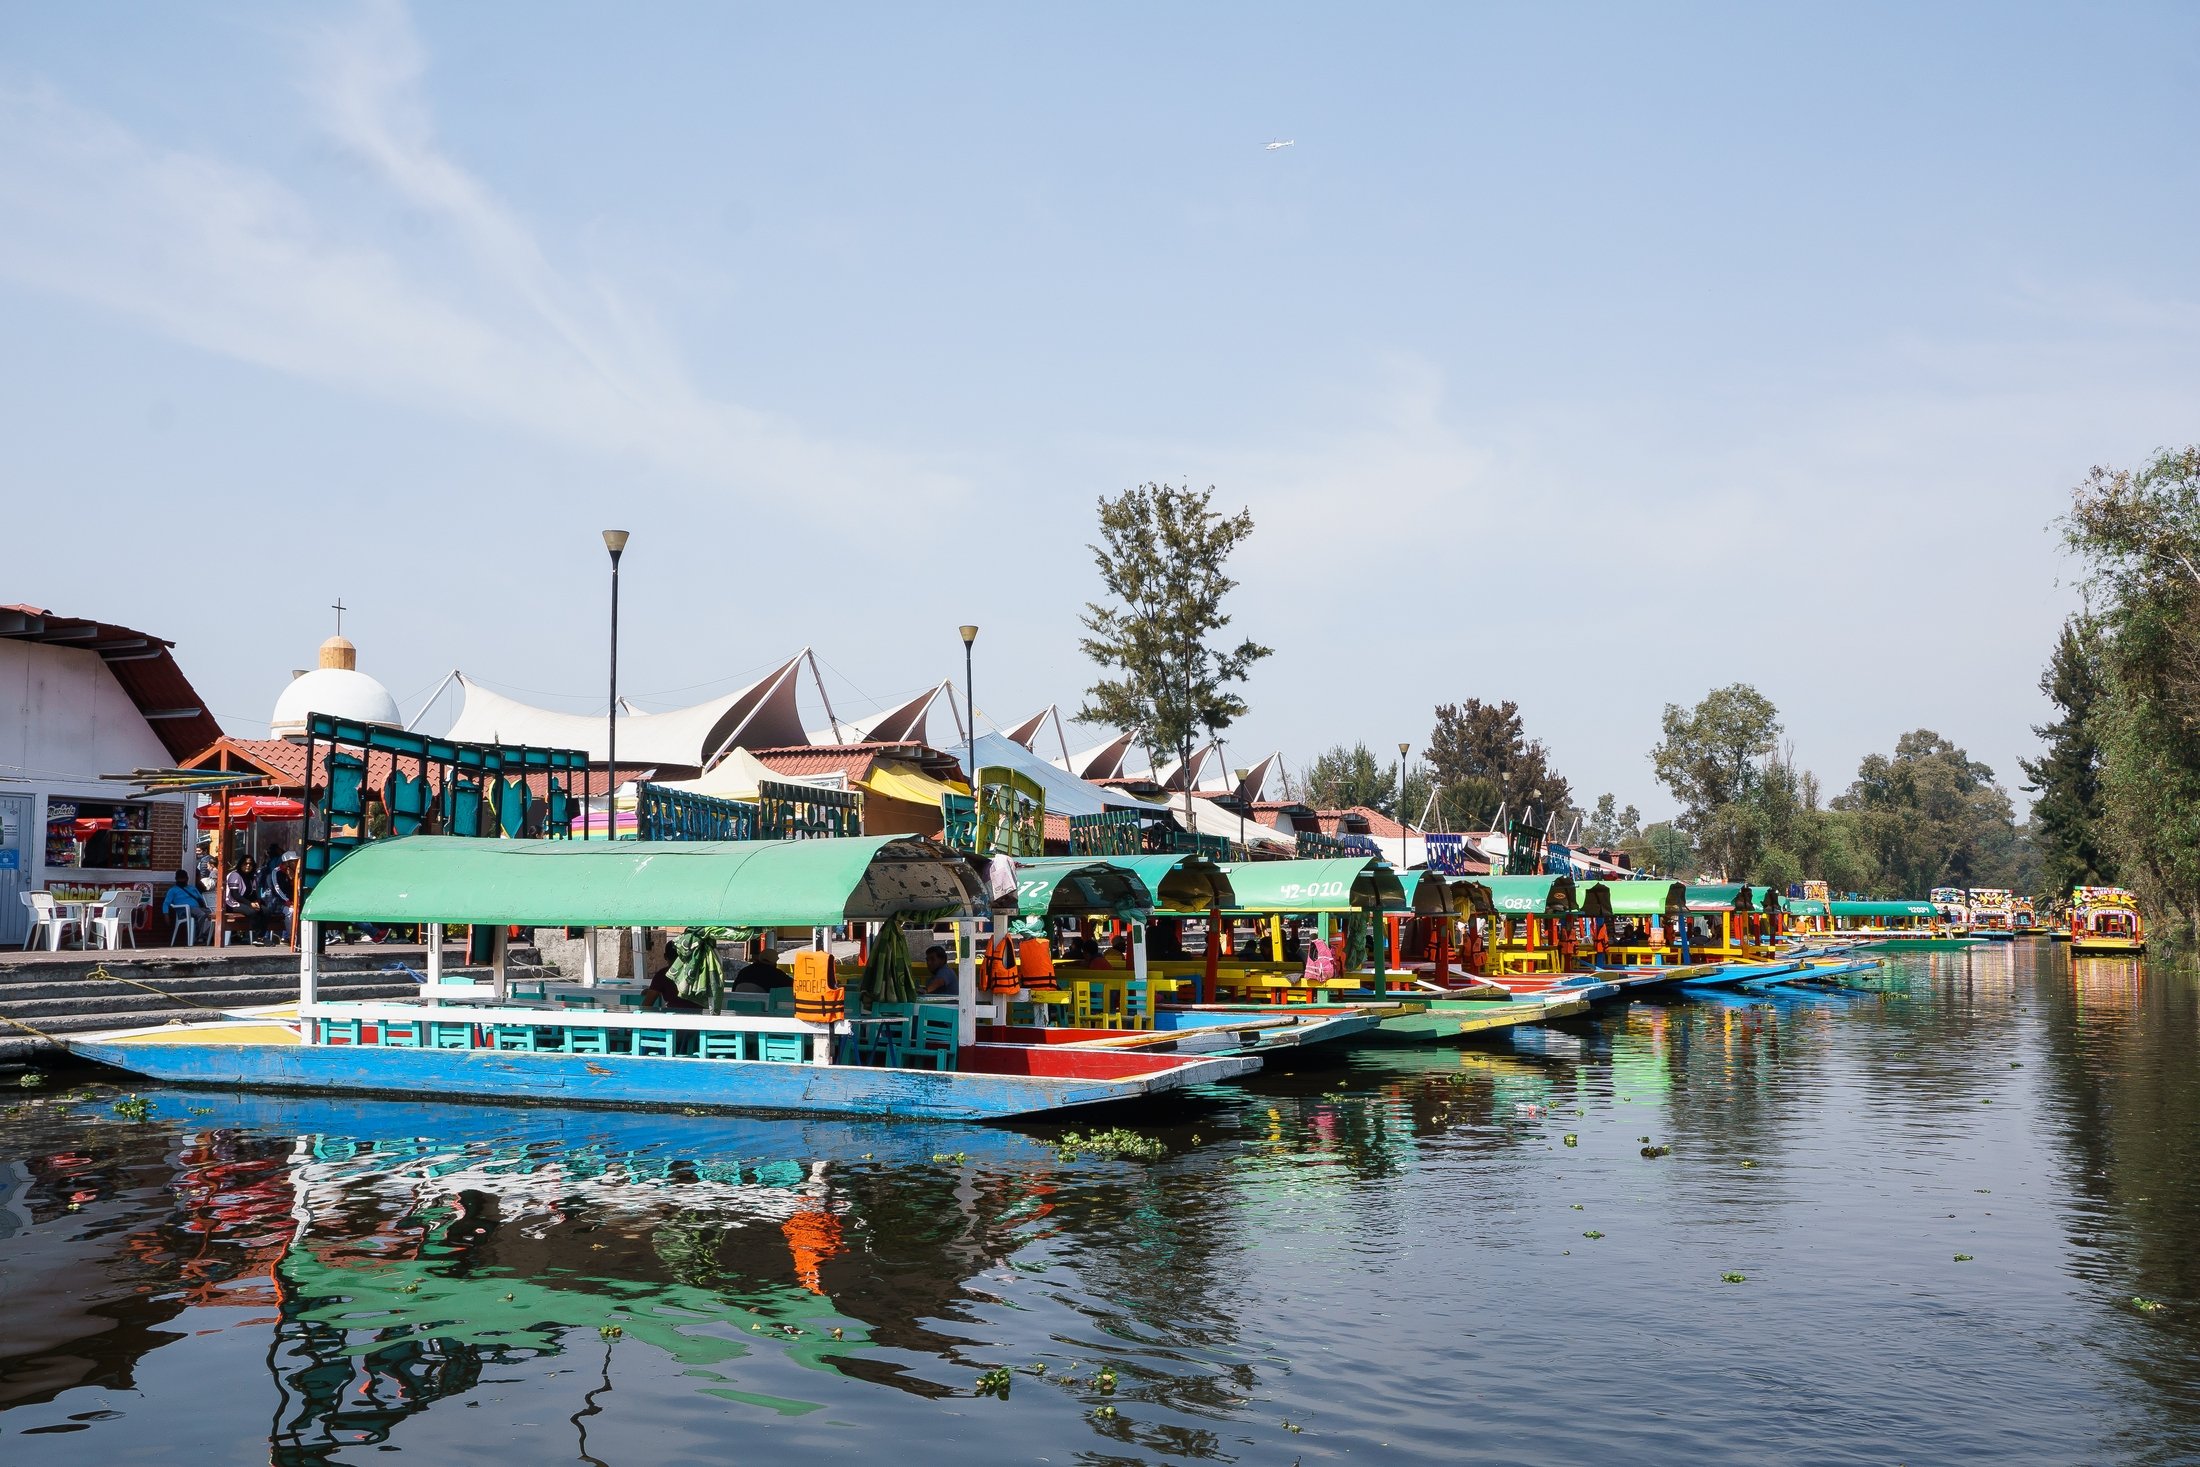 Around 1,500 trajineras can be found on the canals of Xochimilco, Mexico City, Mexico, Jan. 20, 2022. (dpa Photo)